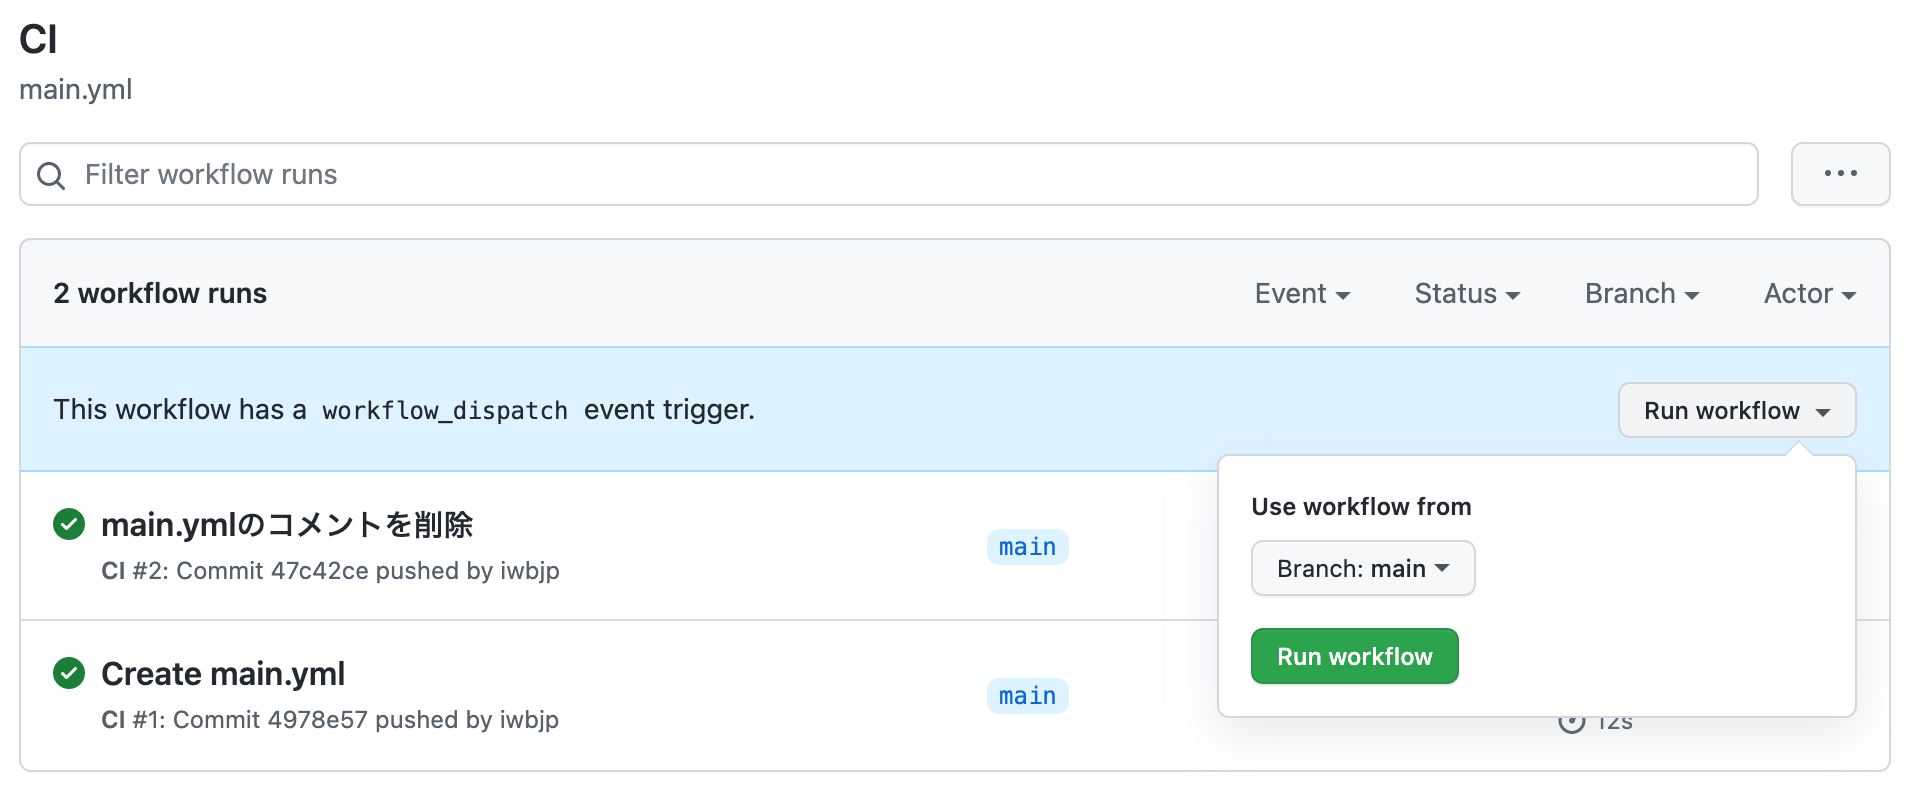 This workflow has a workflow_dispatch event trigger.